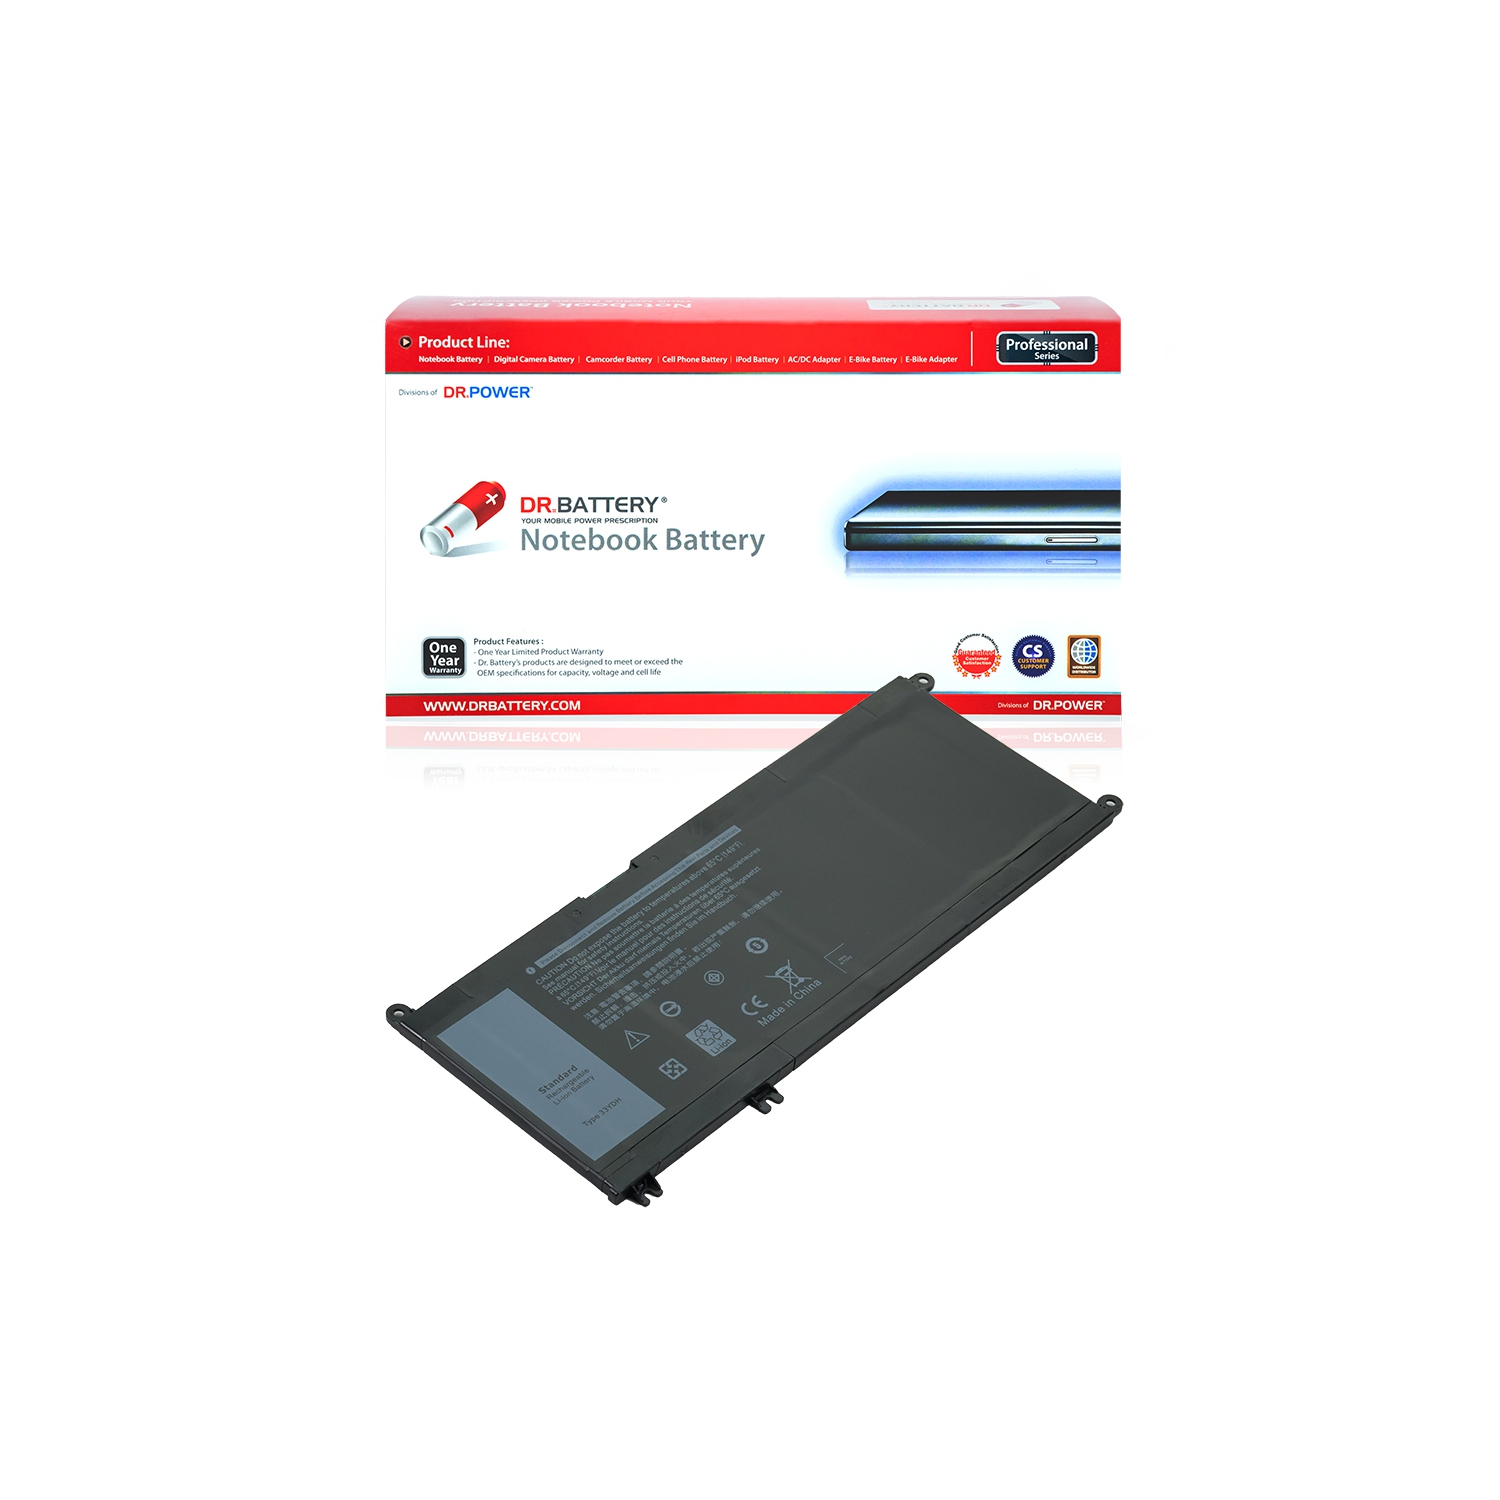 DR. BATTERY - Replacement for Dell G3 17 3779 / G5 15 5587 / Inspiron 17 7773 / Inspiron 17 7778 / 081PF3 / 0PVHT1 / 33YDH